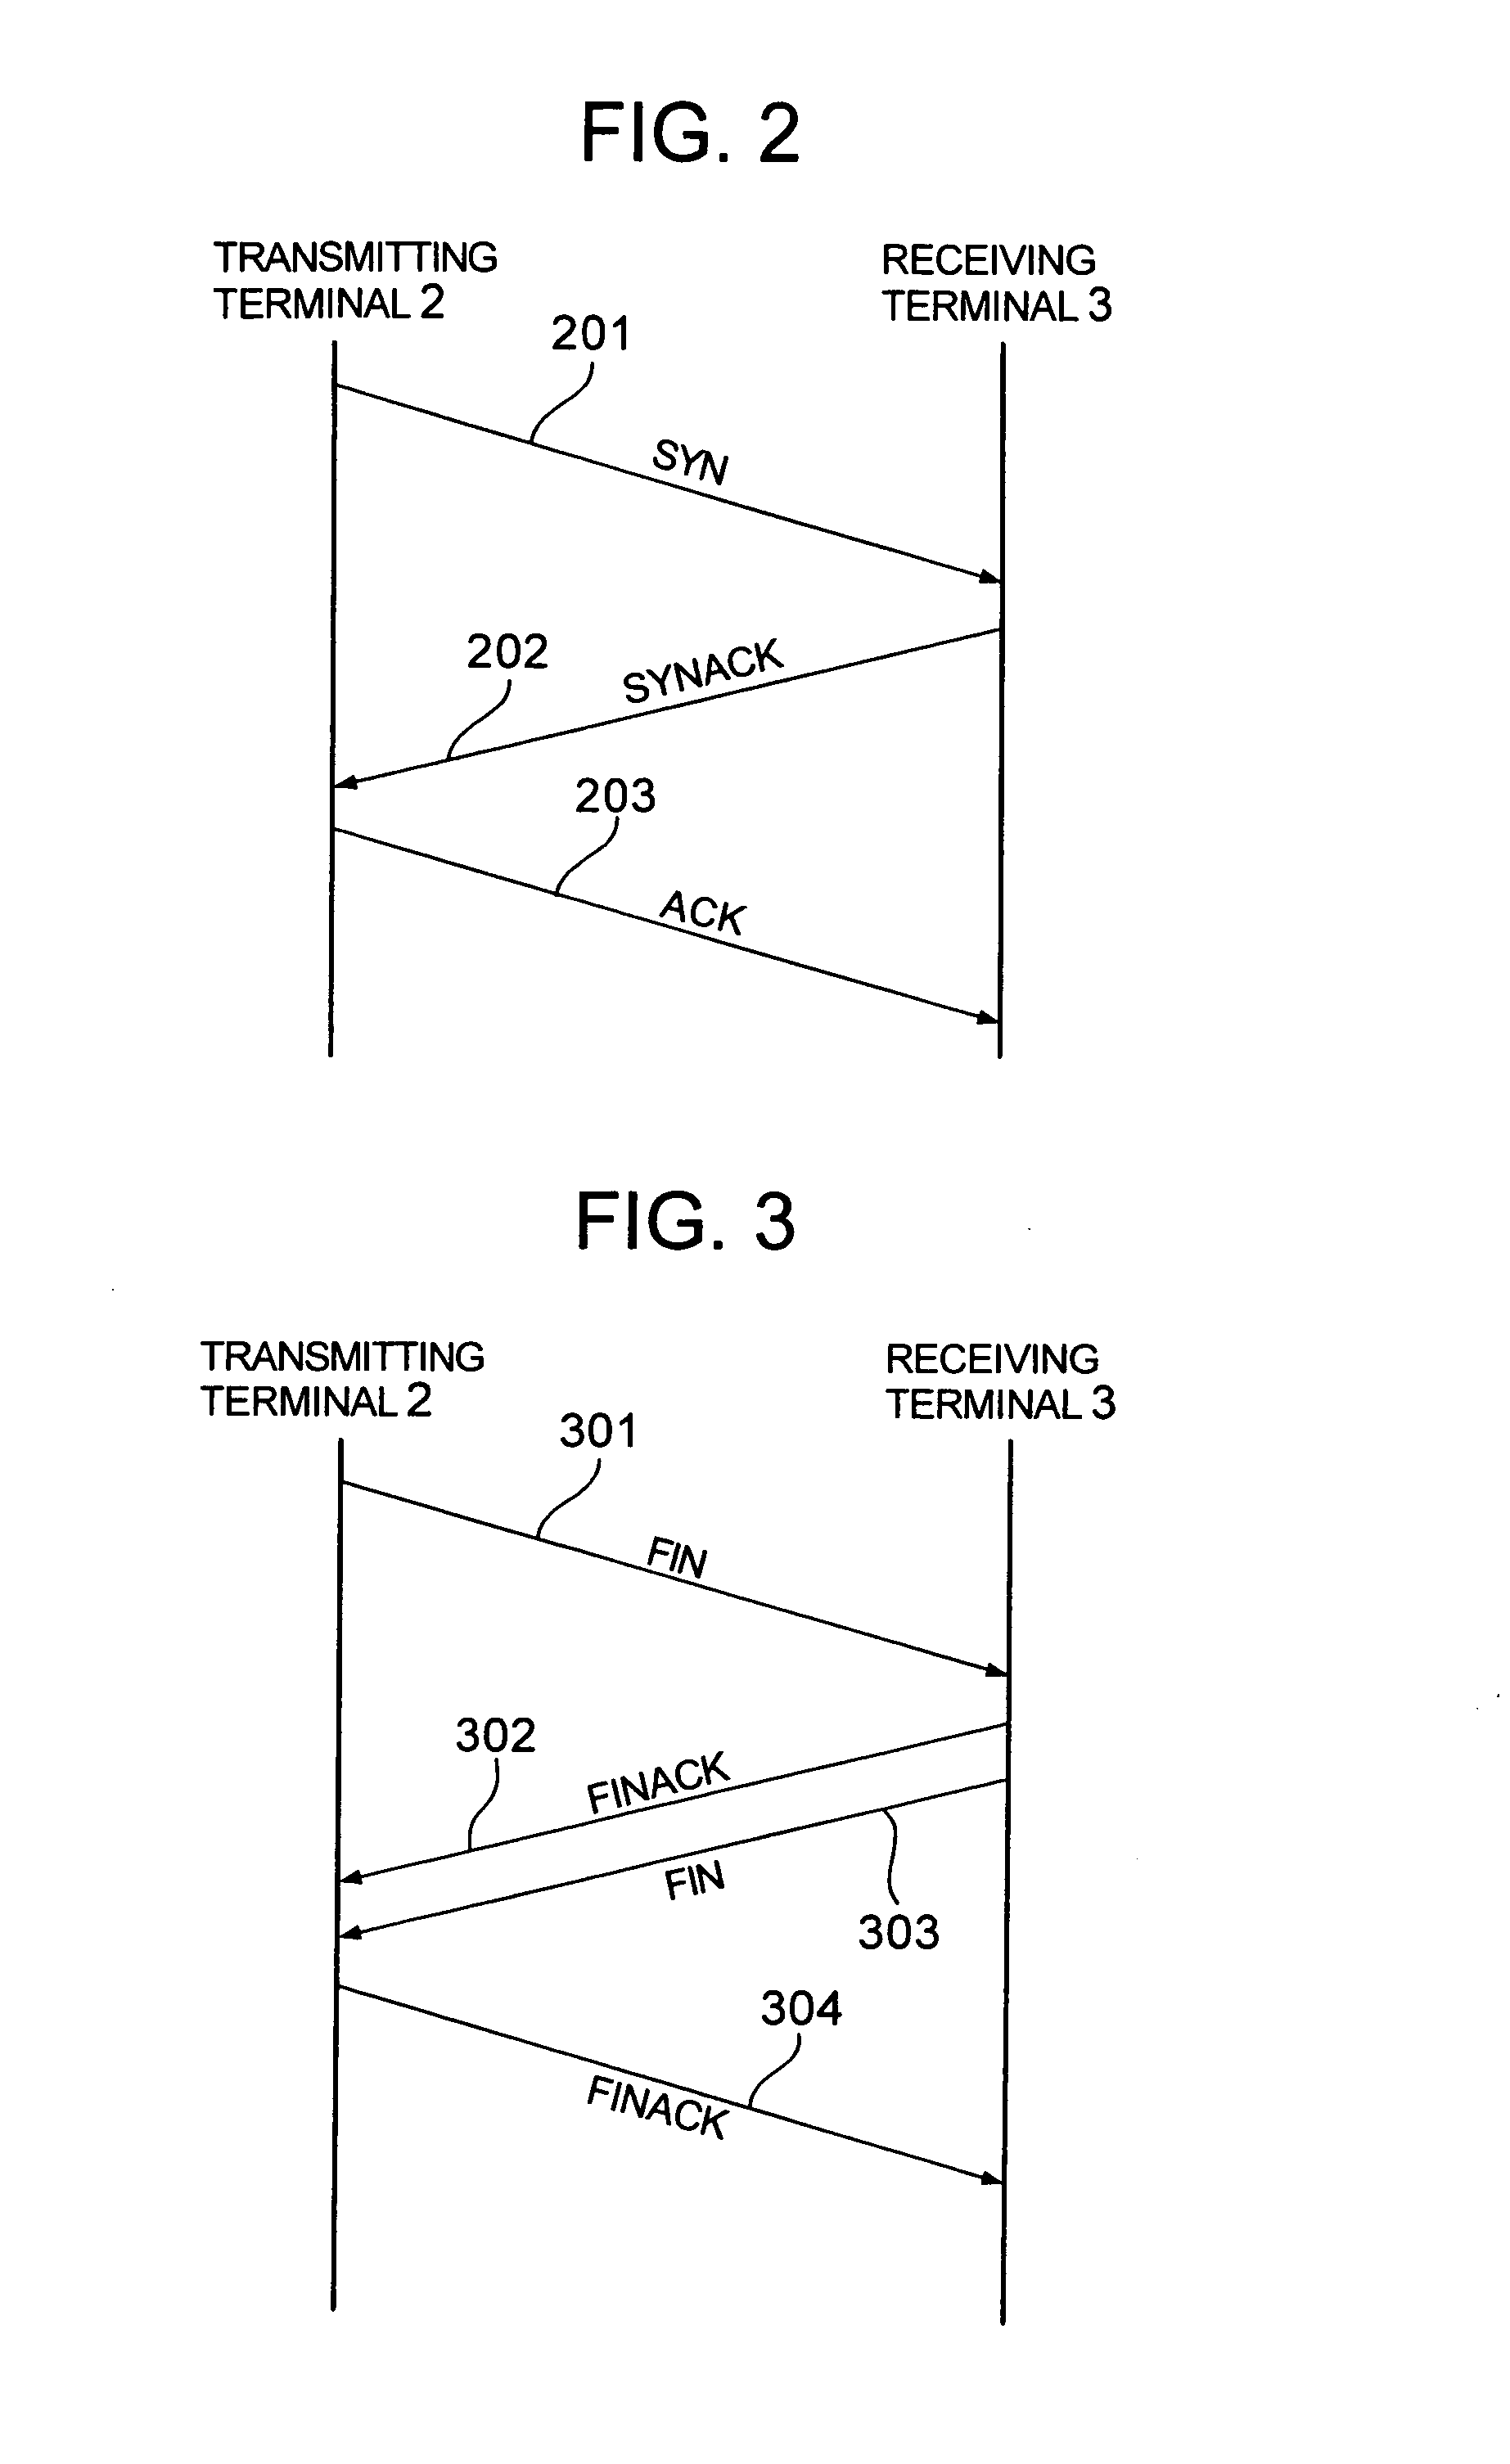 Session relay equipment and session relay method